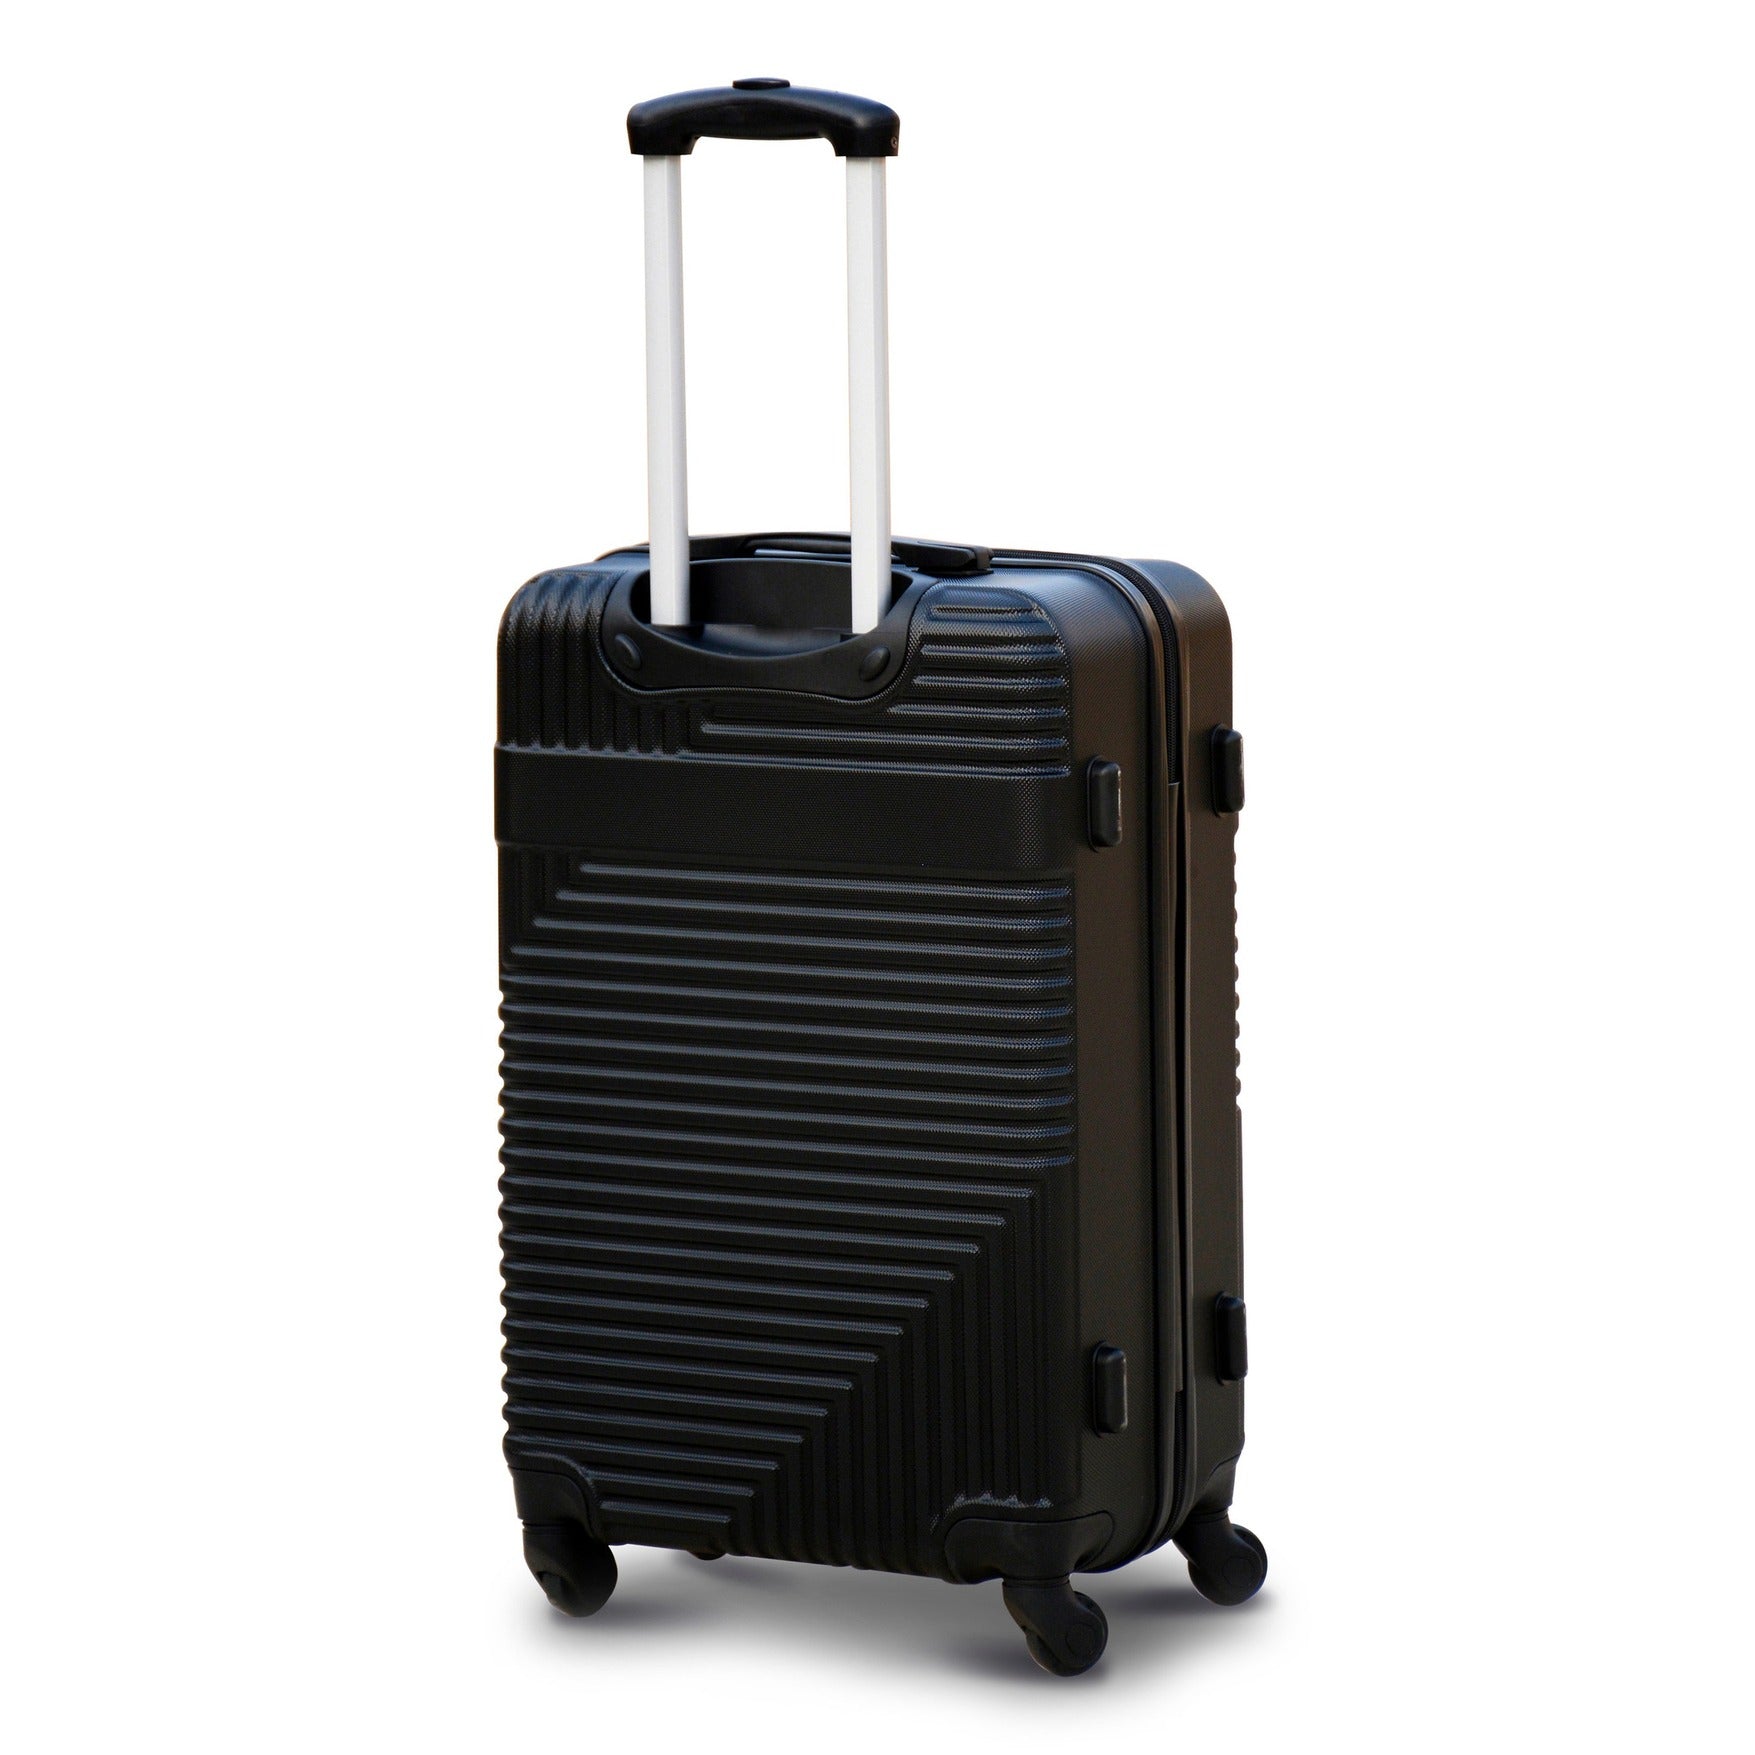 24" Black Travel Way ABS Lightweight Luggage Bag With Spinner Wheel